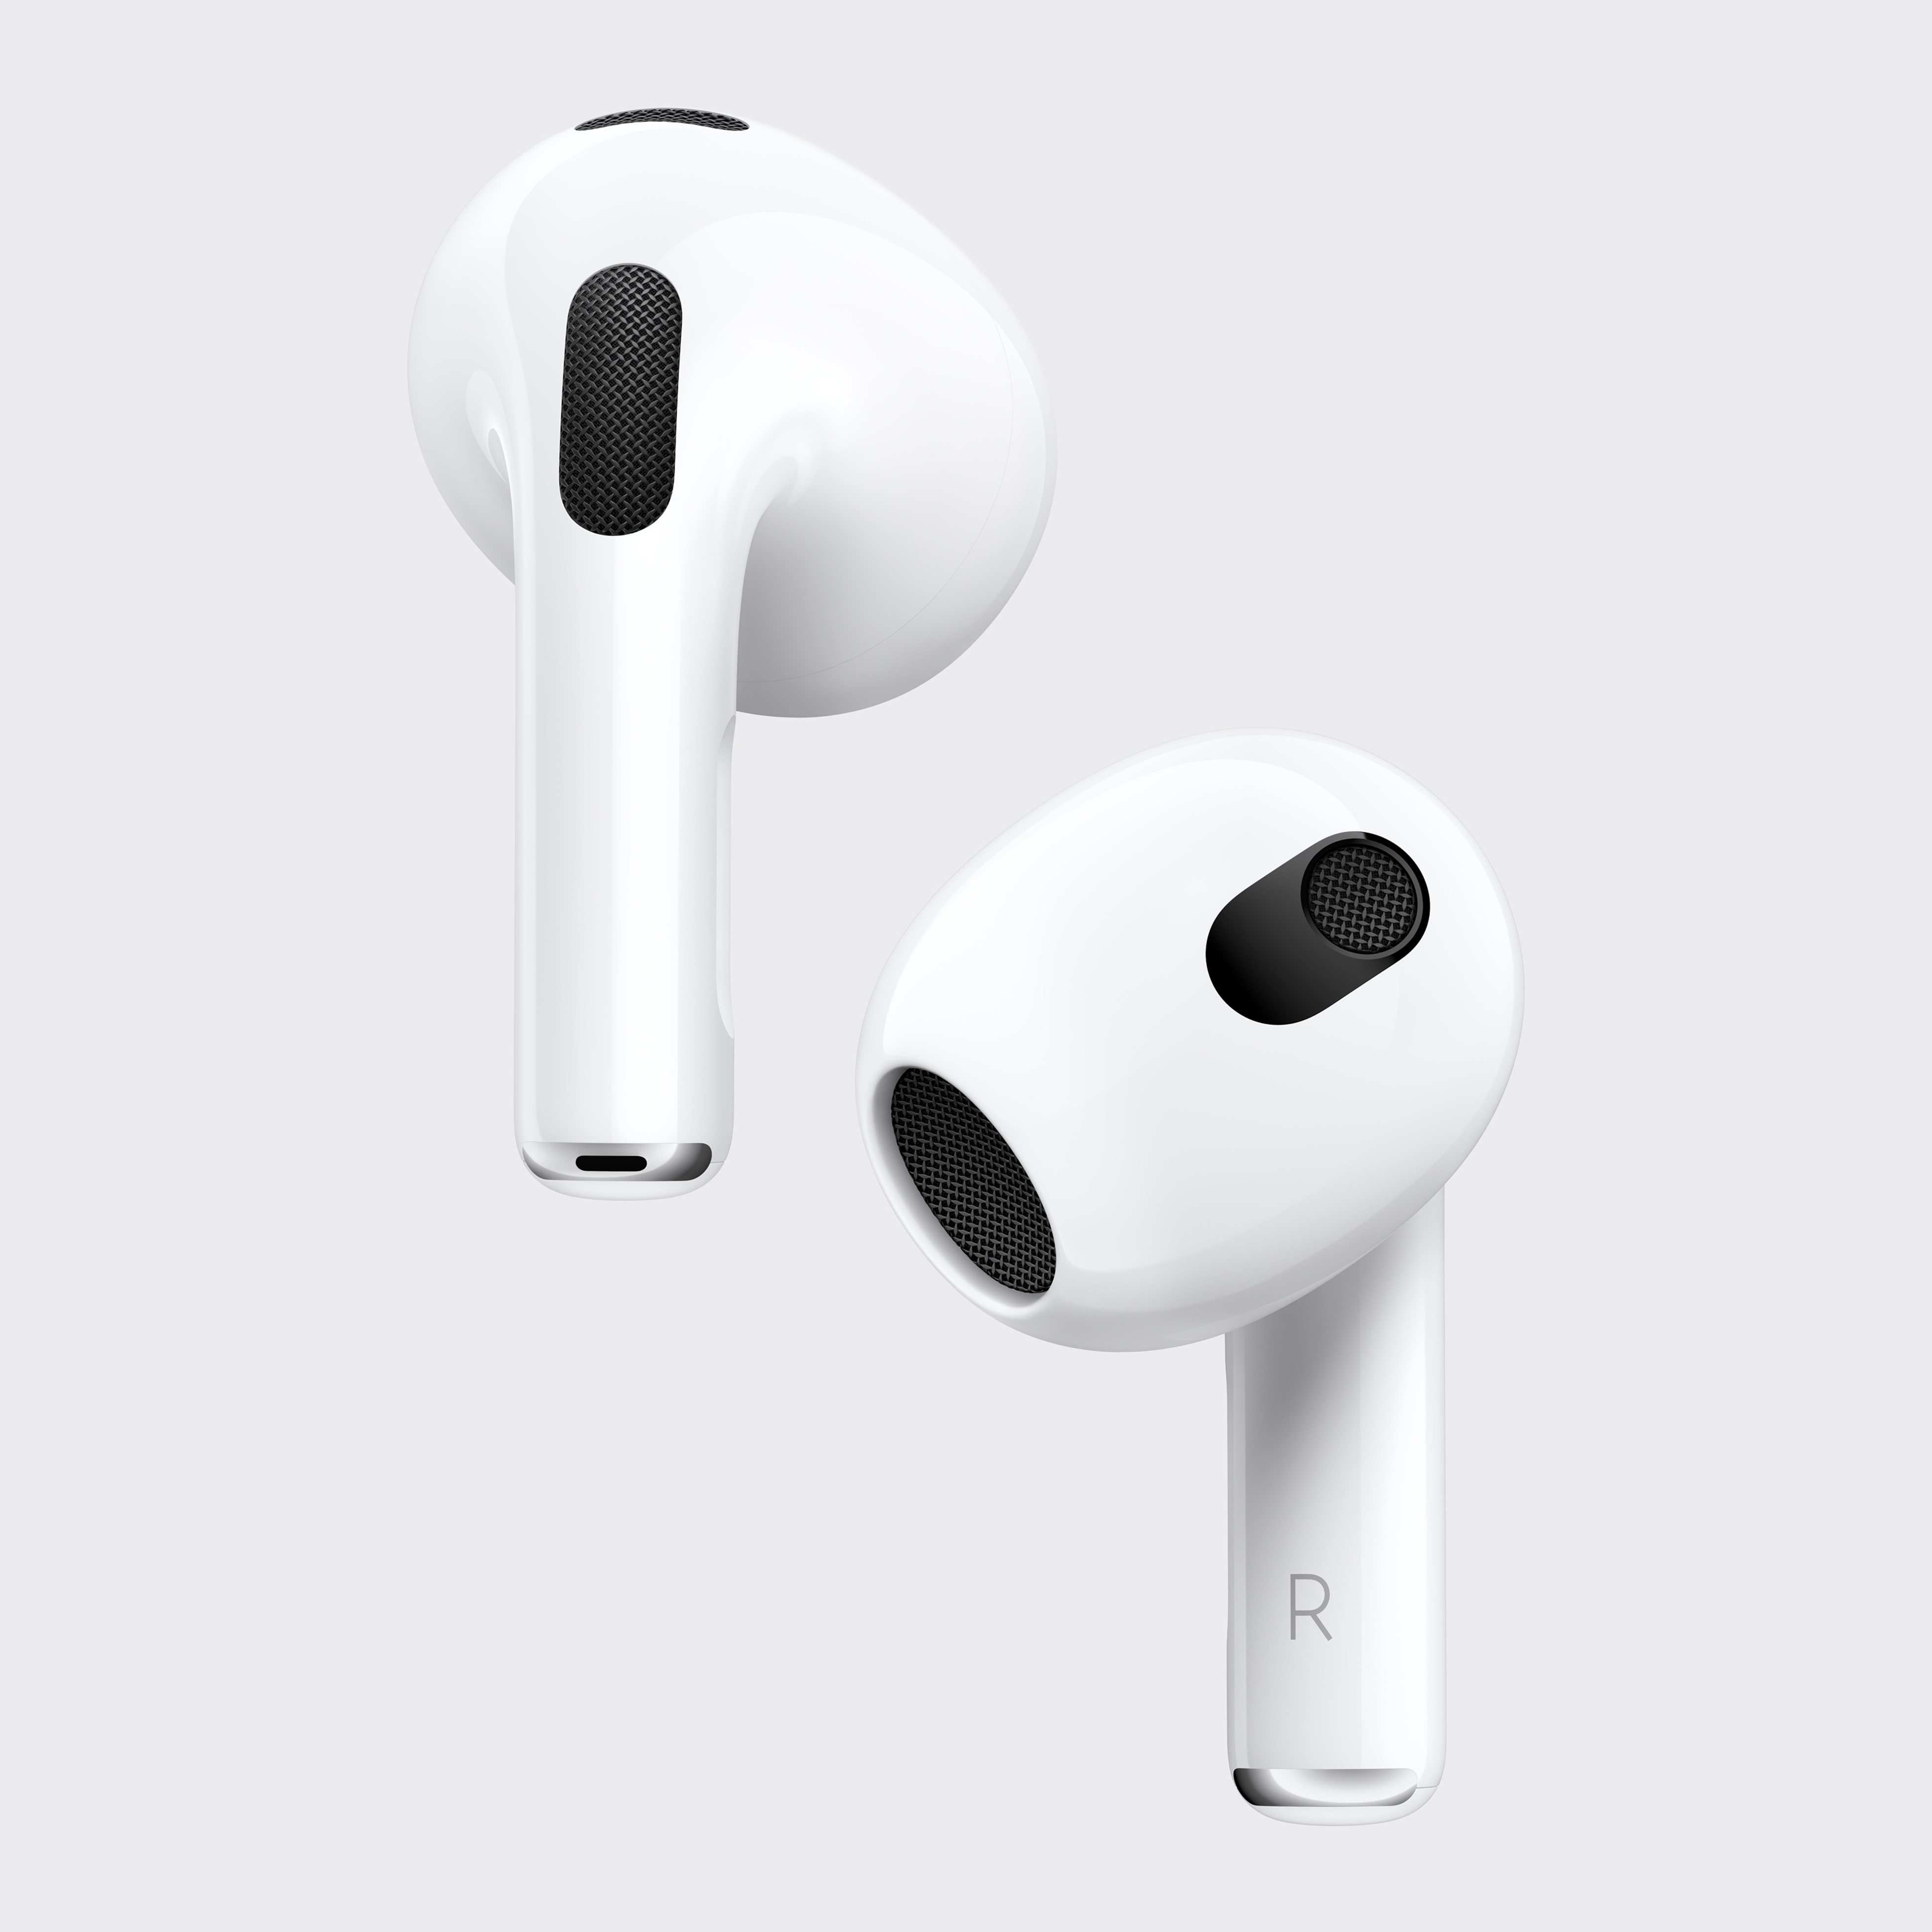 Introducing the next generation of AirPods Apple